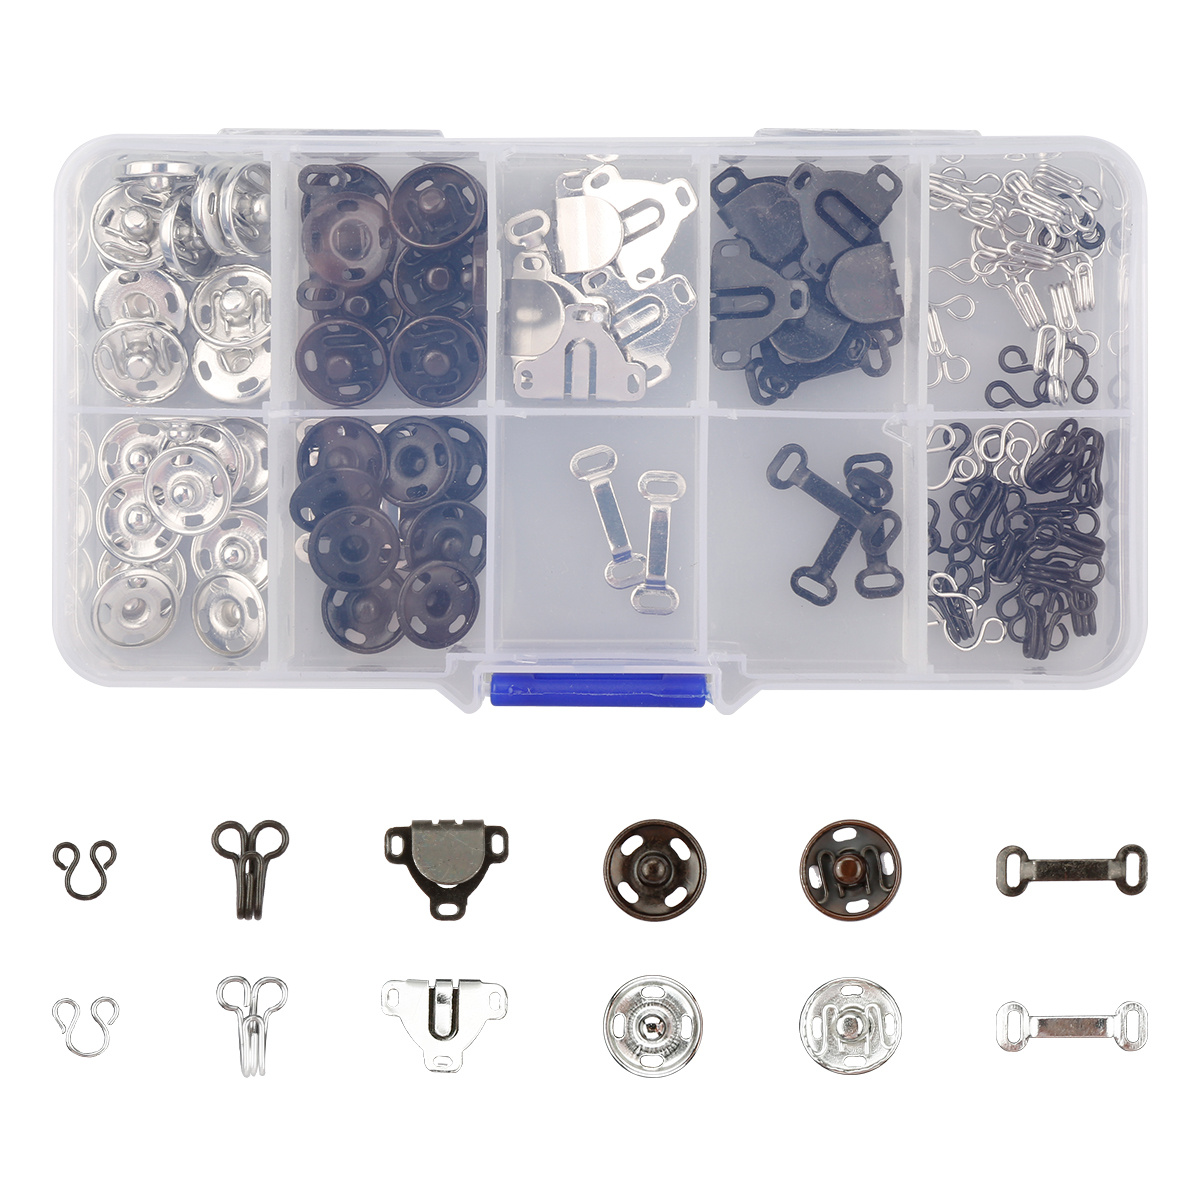 Bqhagfte 36 Pairs Metal Sewing Hooks And Eyes Closure Pants Hook And Eye For Bra Trousers Skirt Dress Clothing Diy (3 Color)